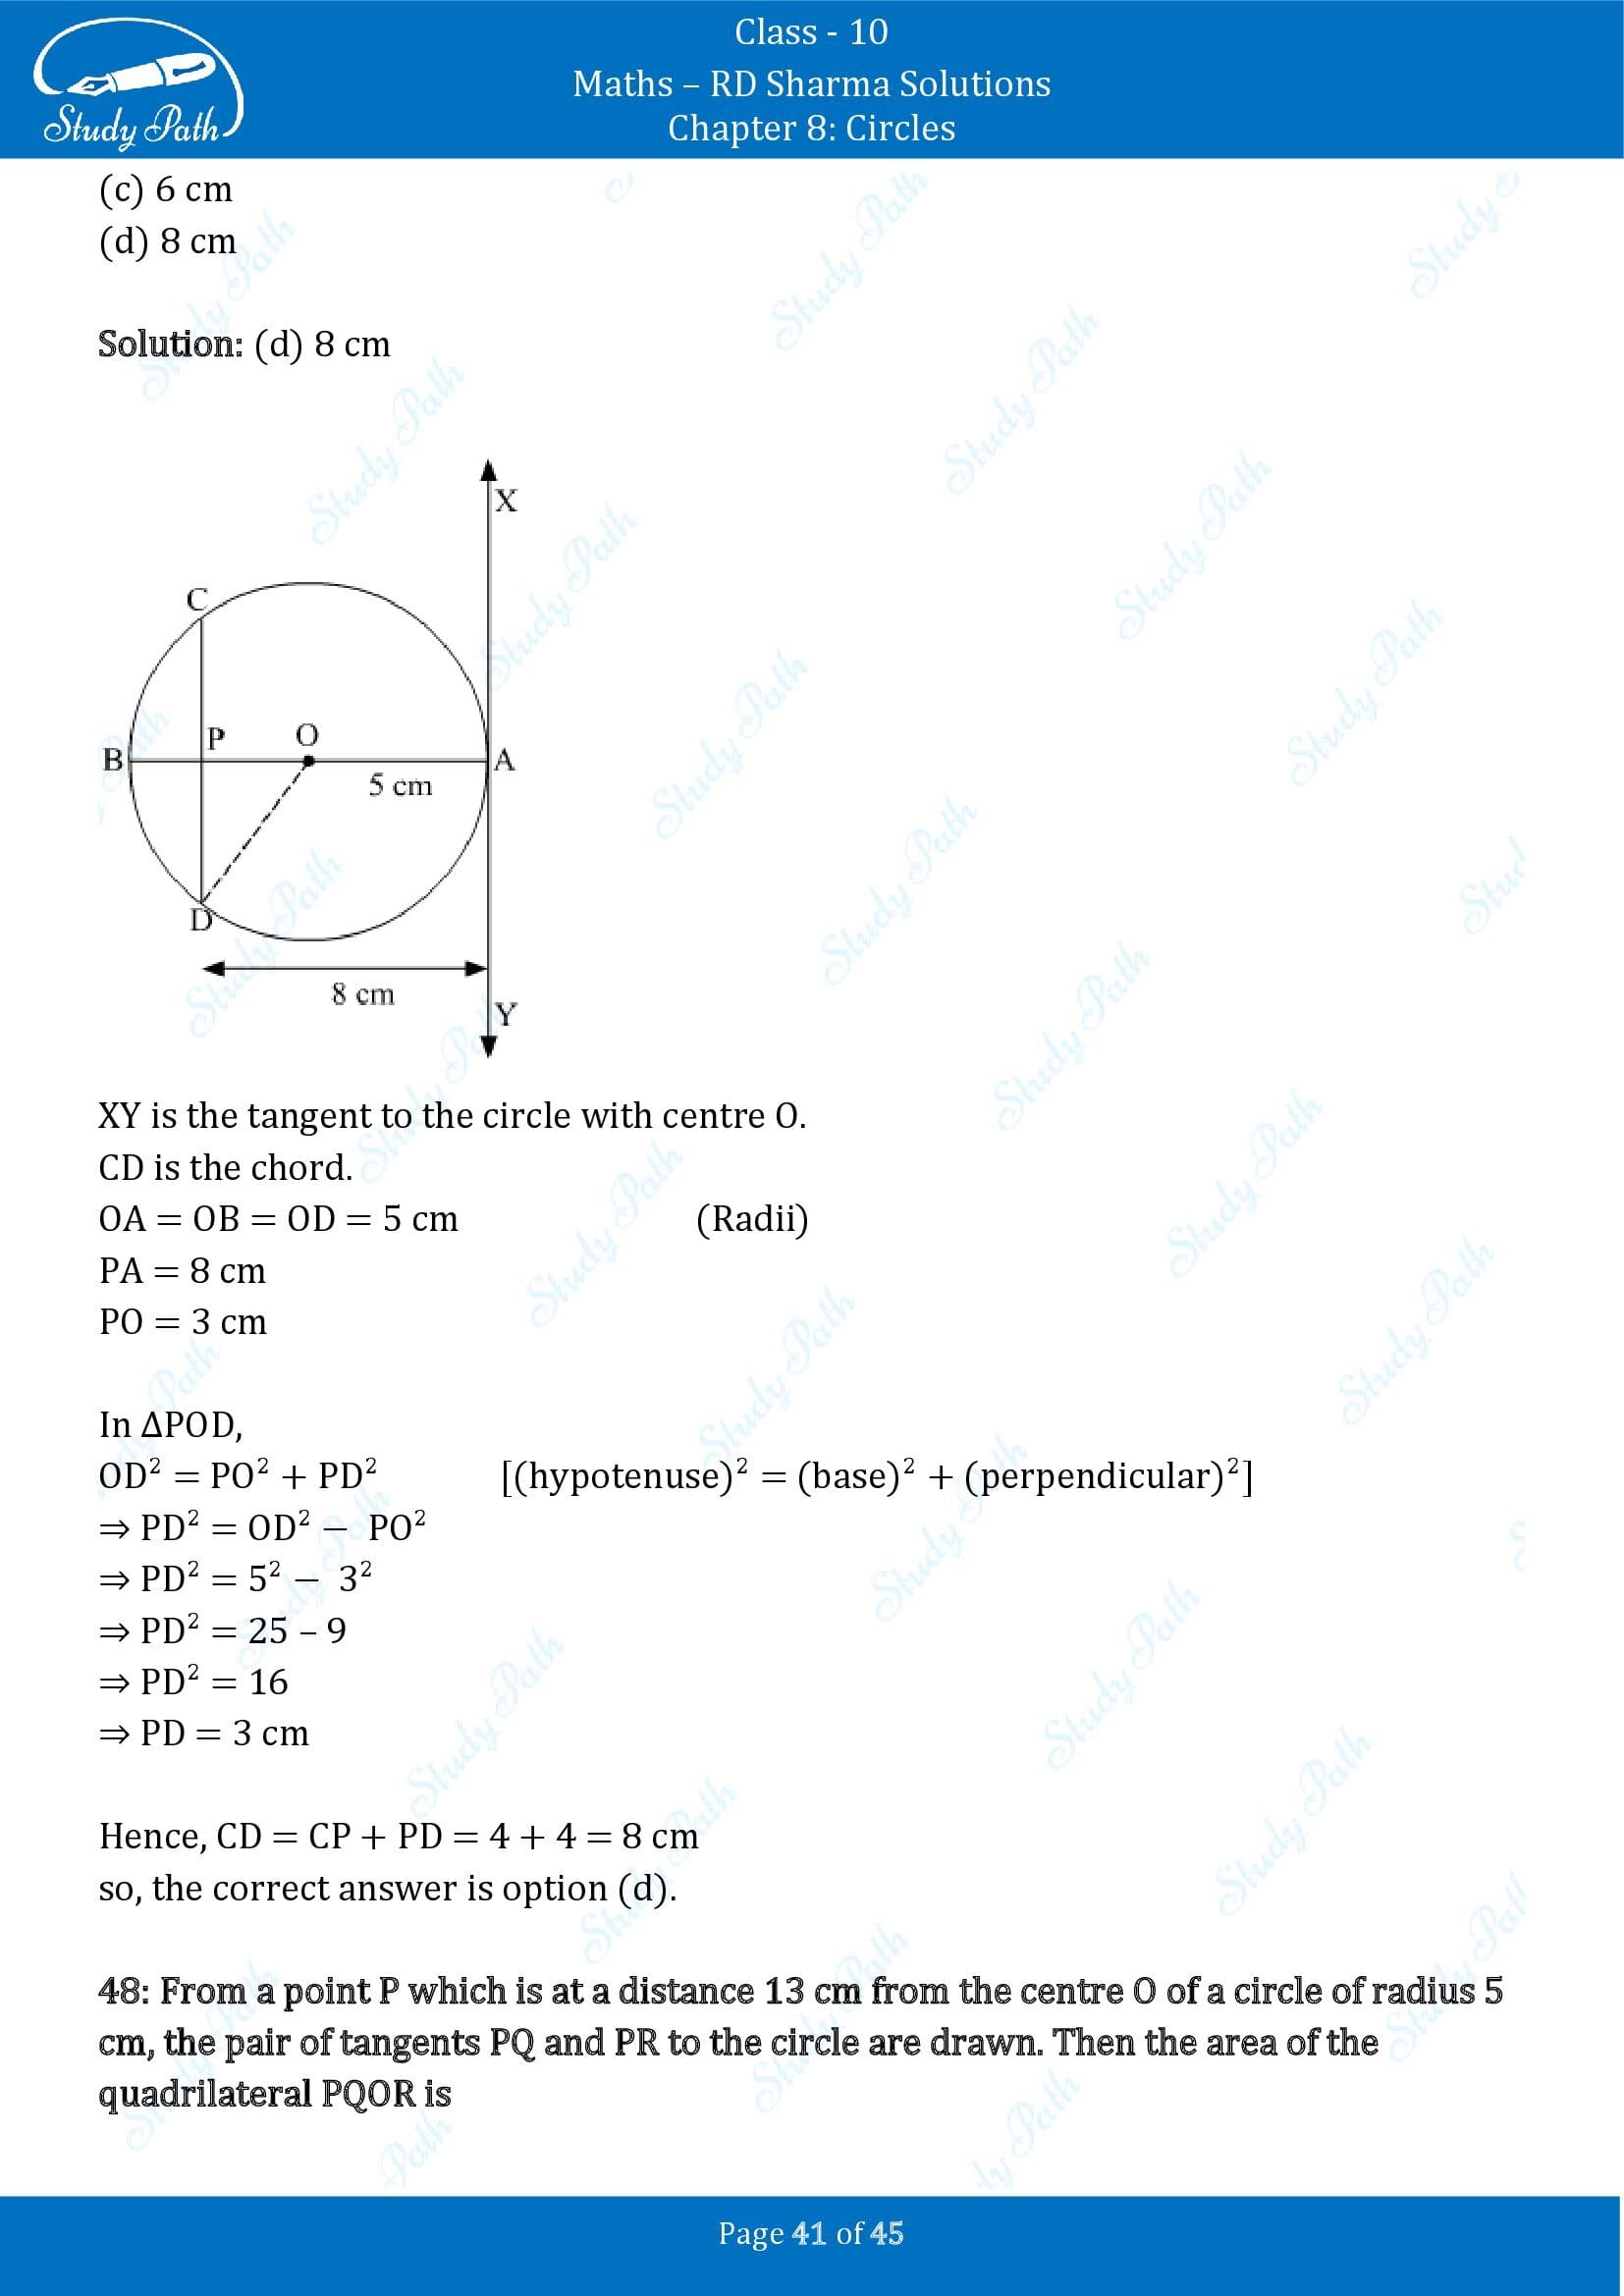 RD Sharma Solutions Class 10 Chapter 8 Circles Multiple Choice Questions MCQs 00041